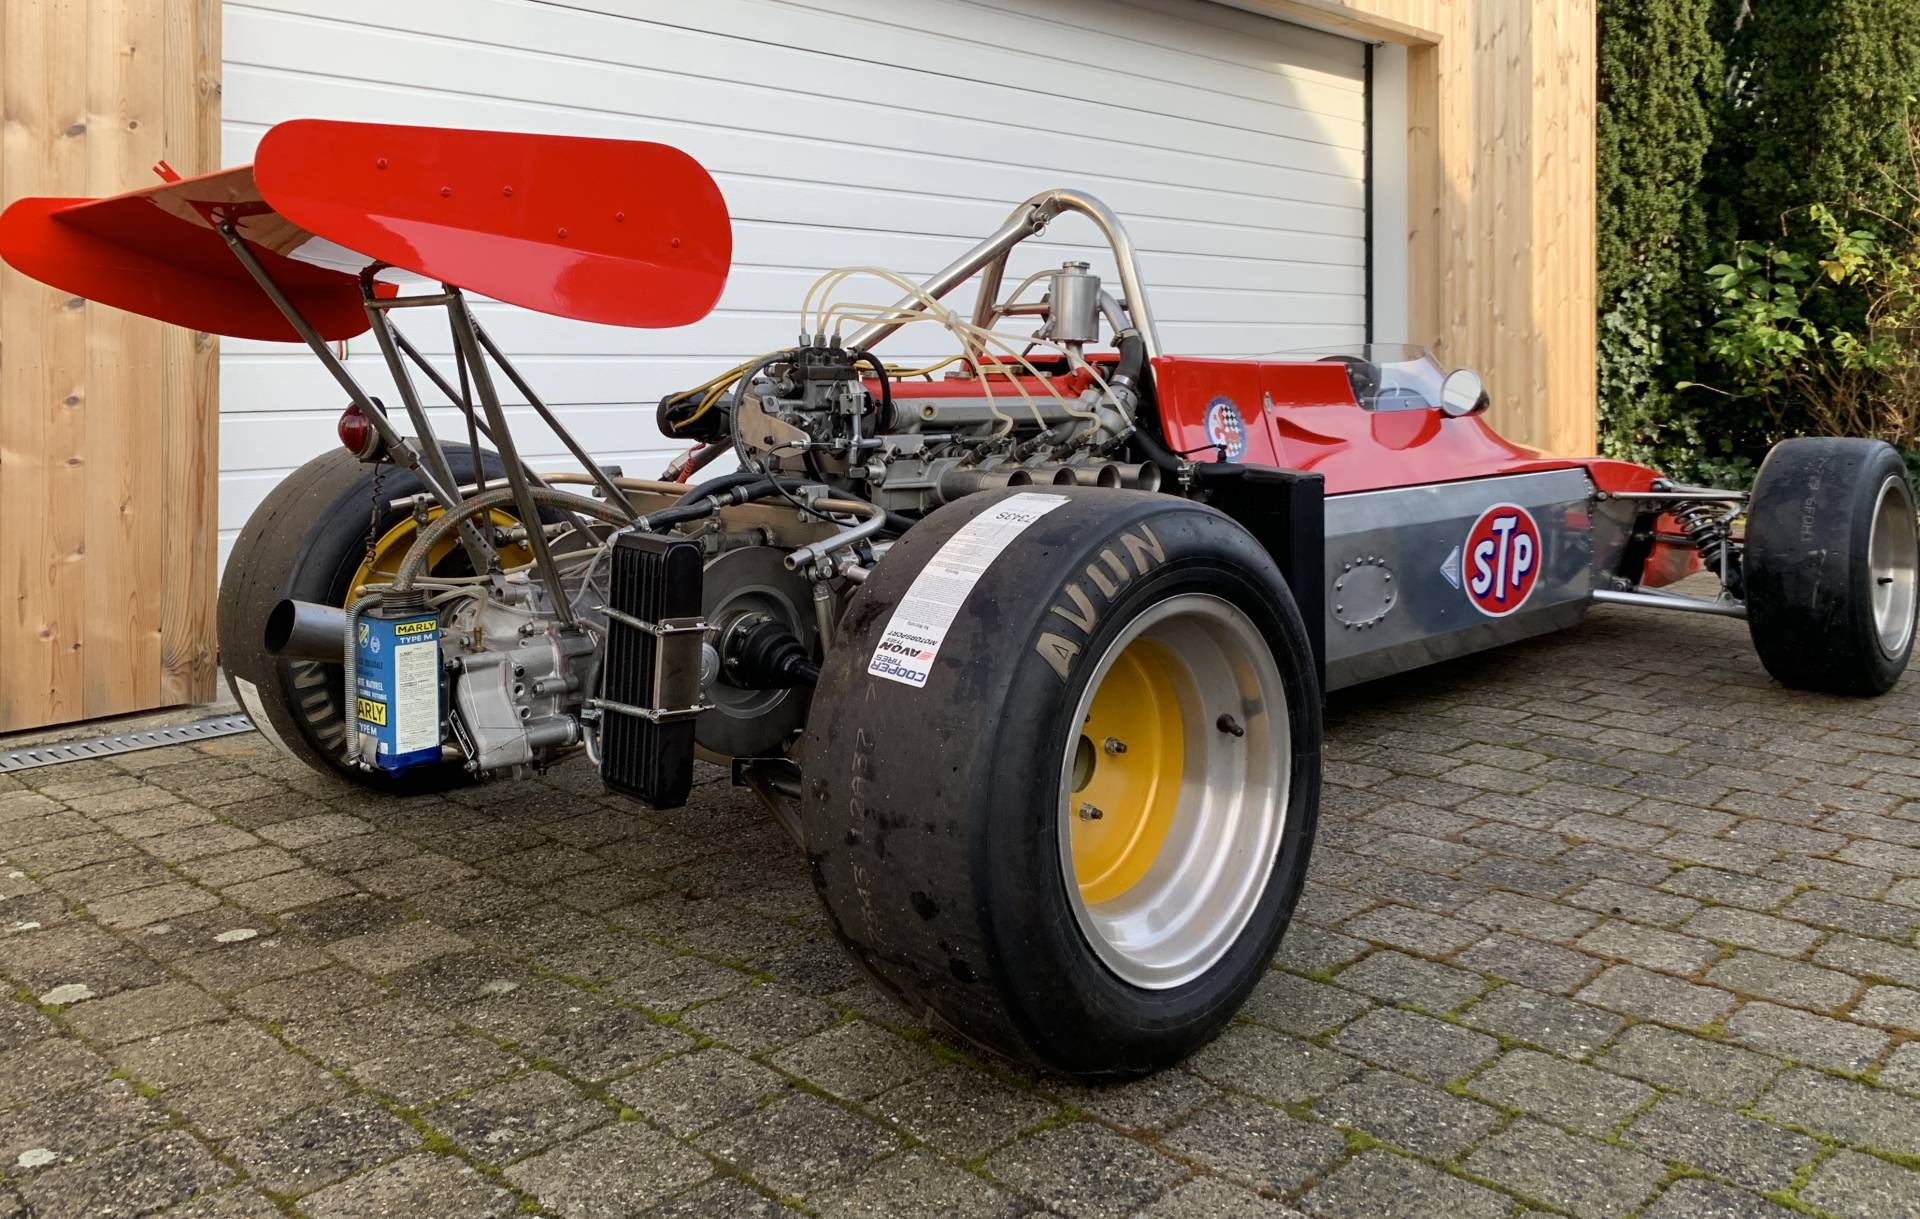 For Sale: Brabham BT38 (1972) offered for AUD 62,635